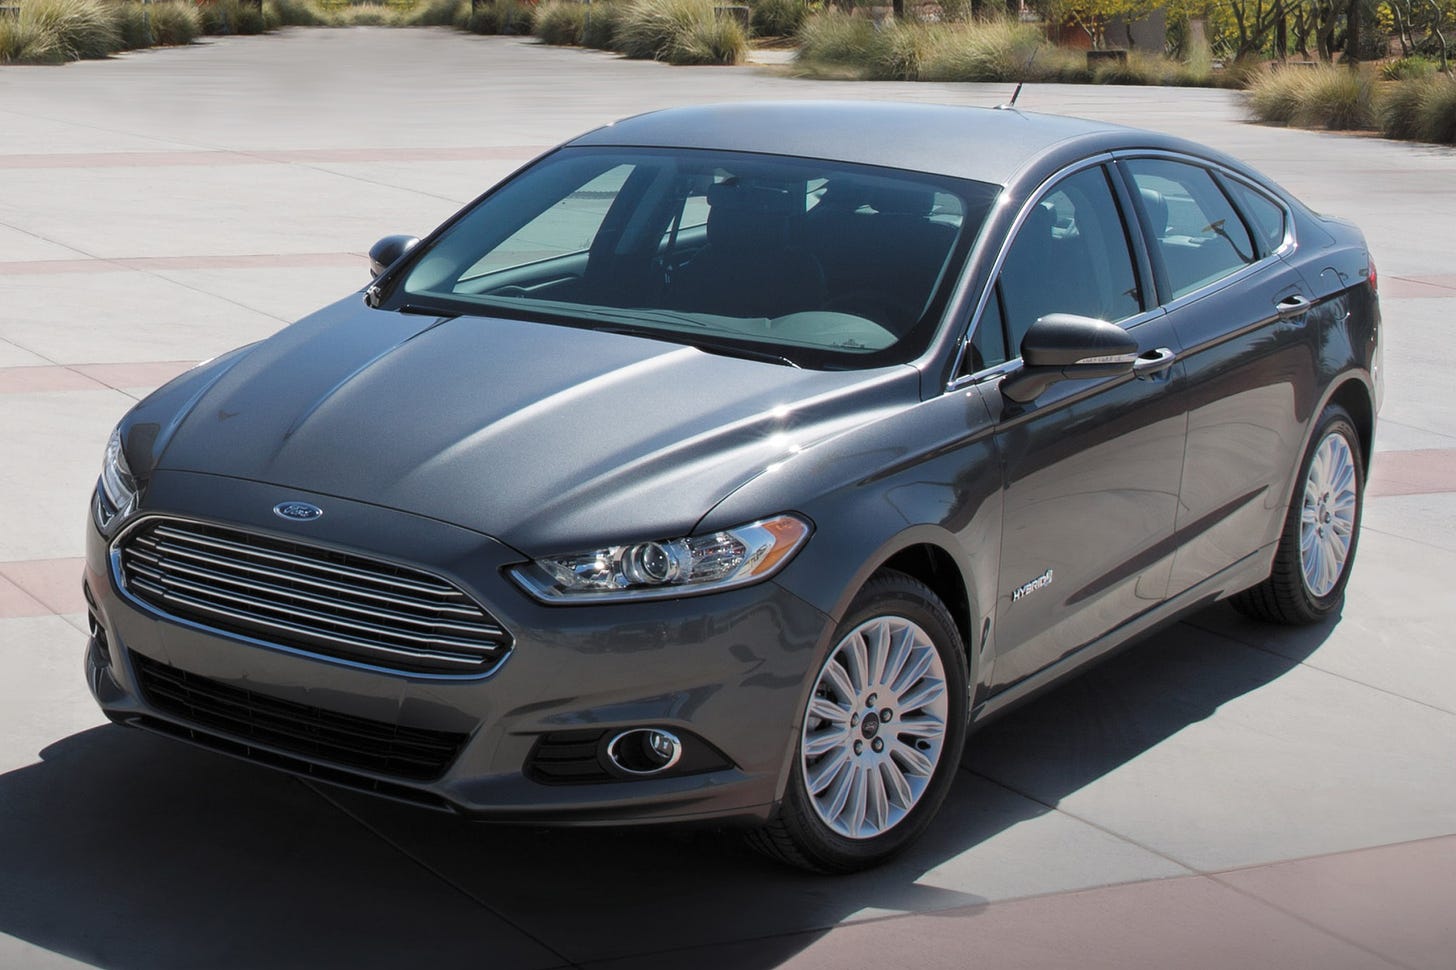 2017 Ford Fusion Hybrid S, Silver. 